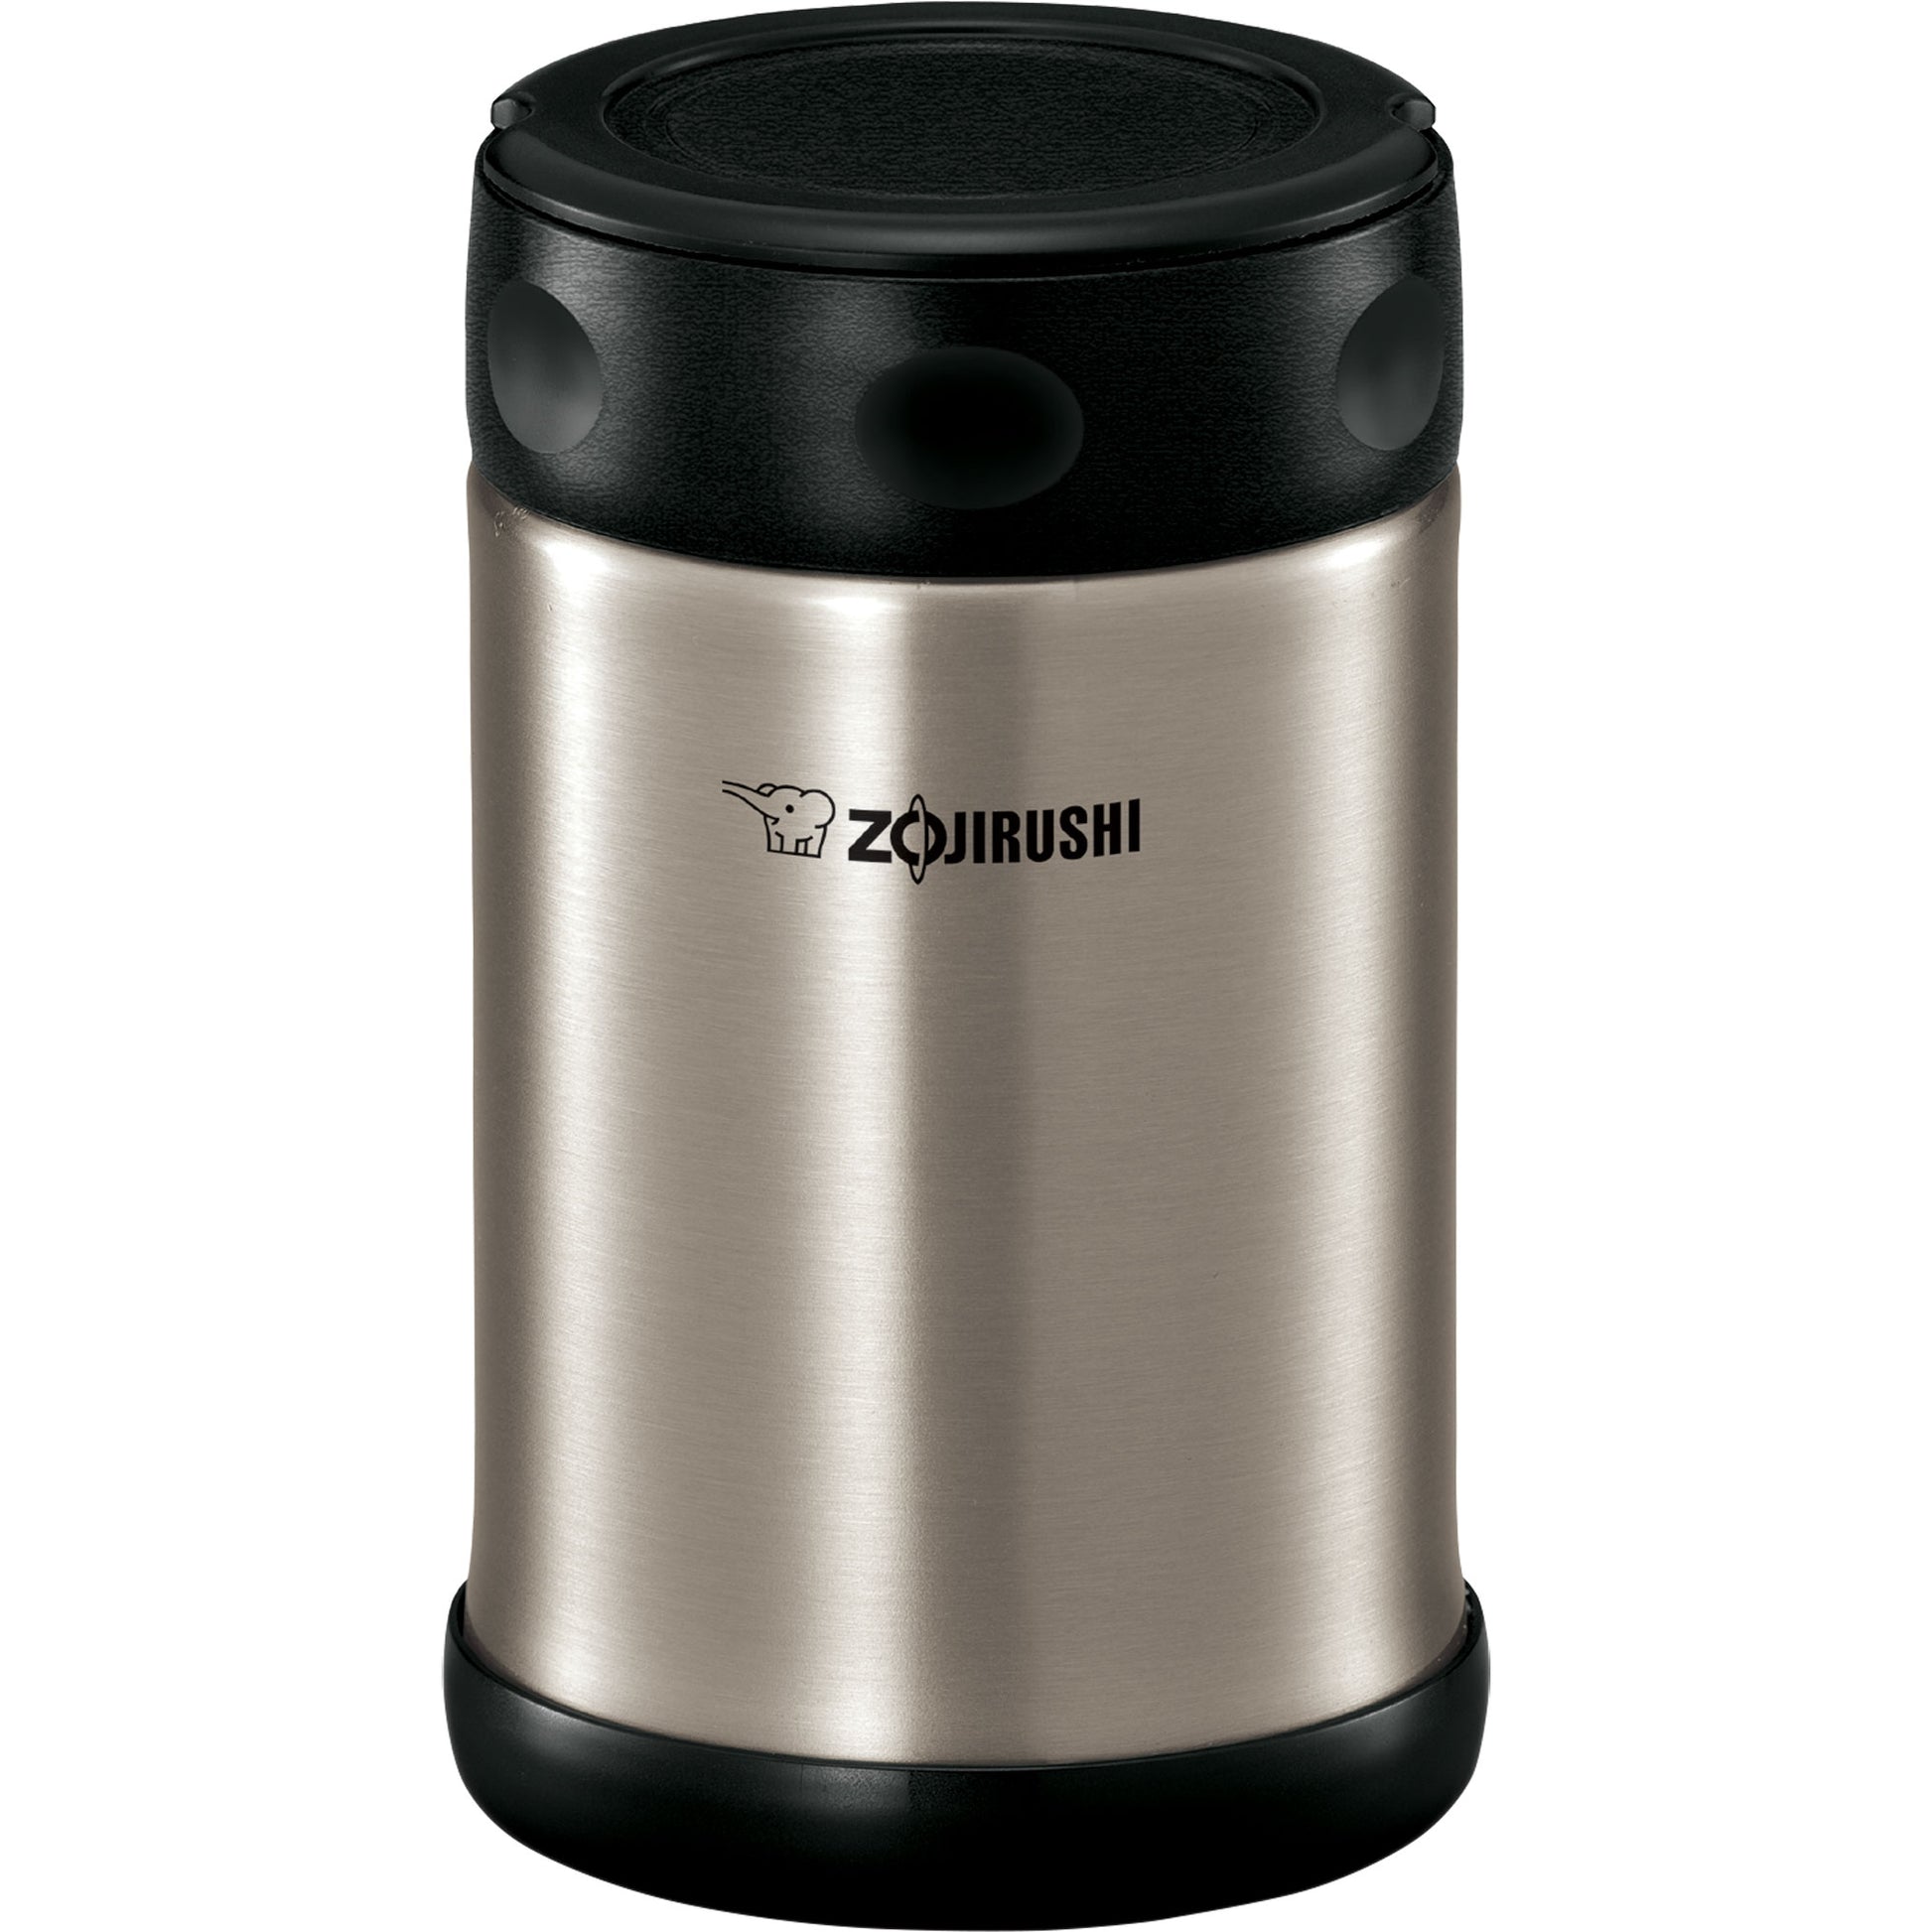 Large thermos for food and ice cream - Perfect for the field trip